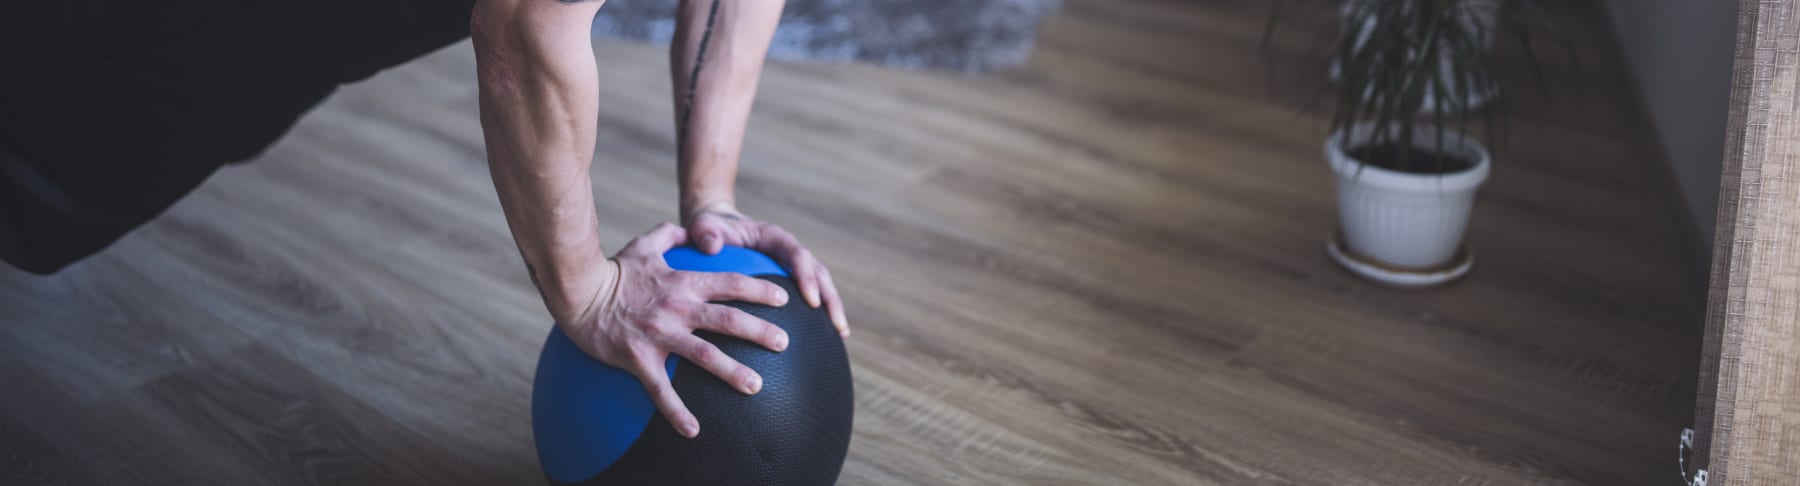 exercising with medicine ball